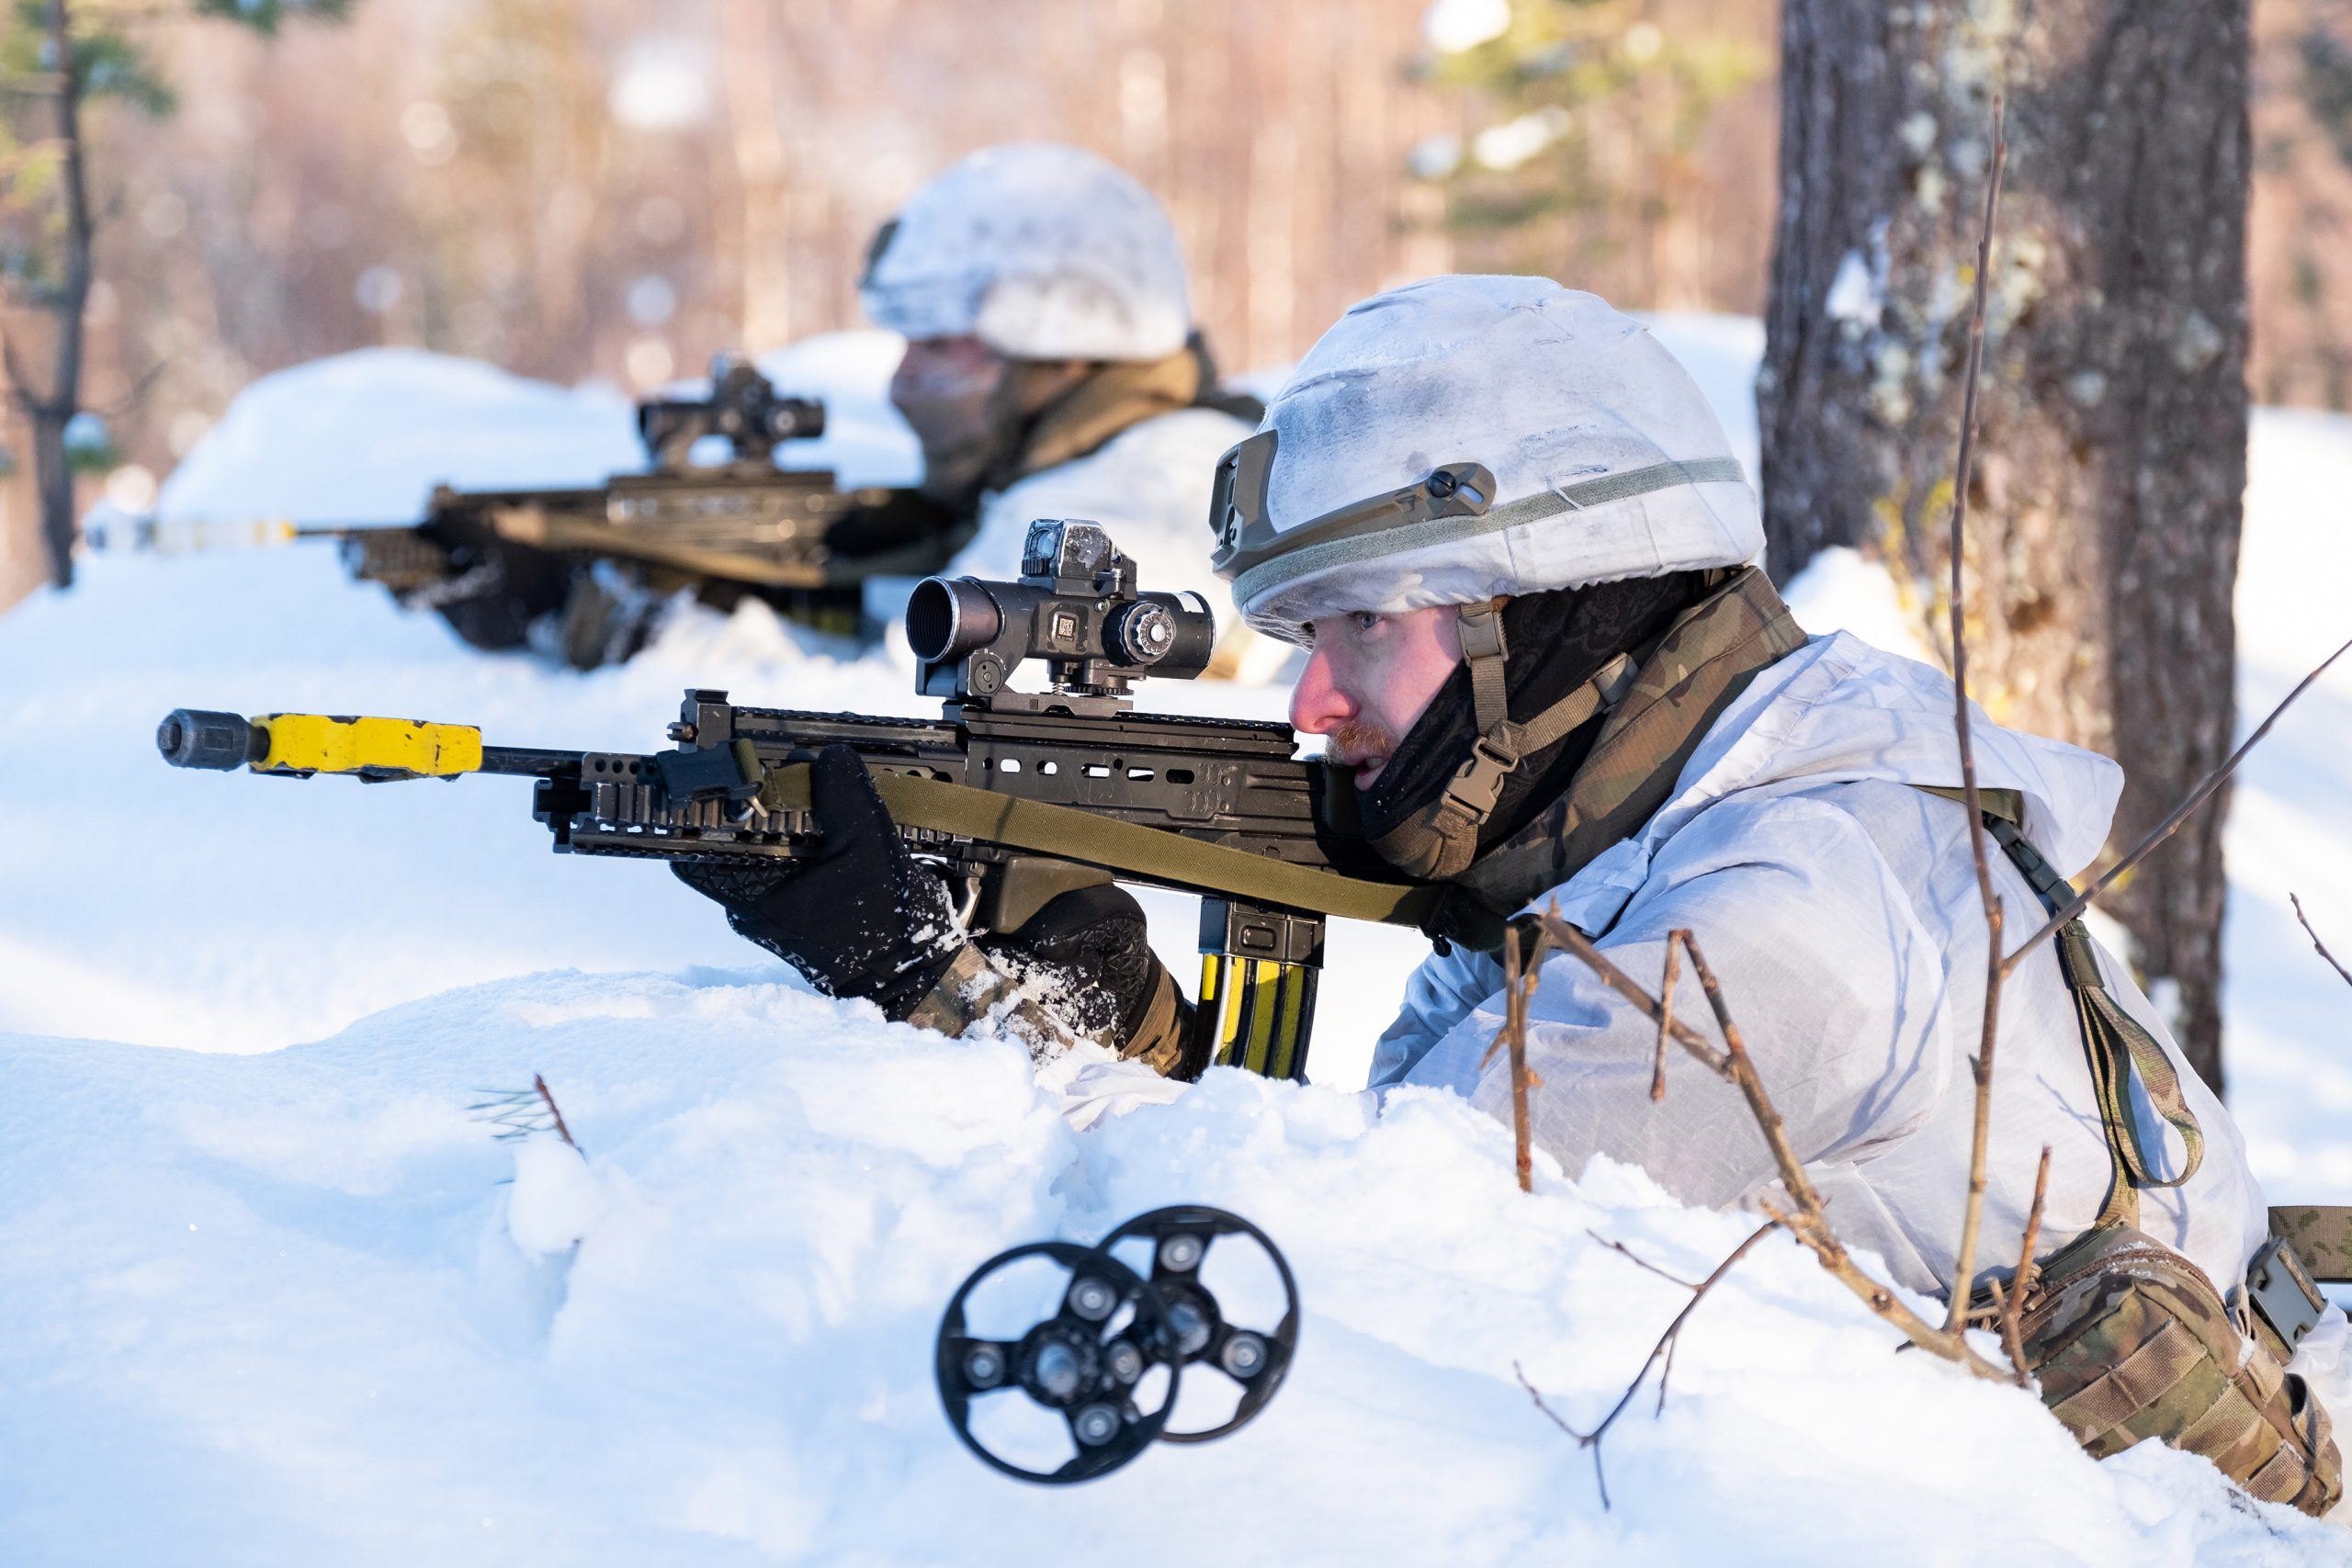 Royal Marines Complete Arctic Training With Intensive Combat Missions